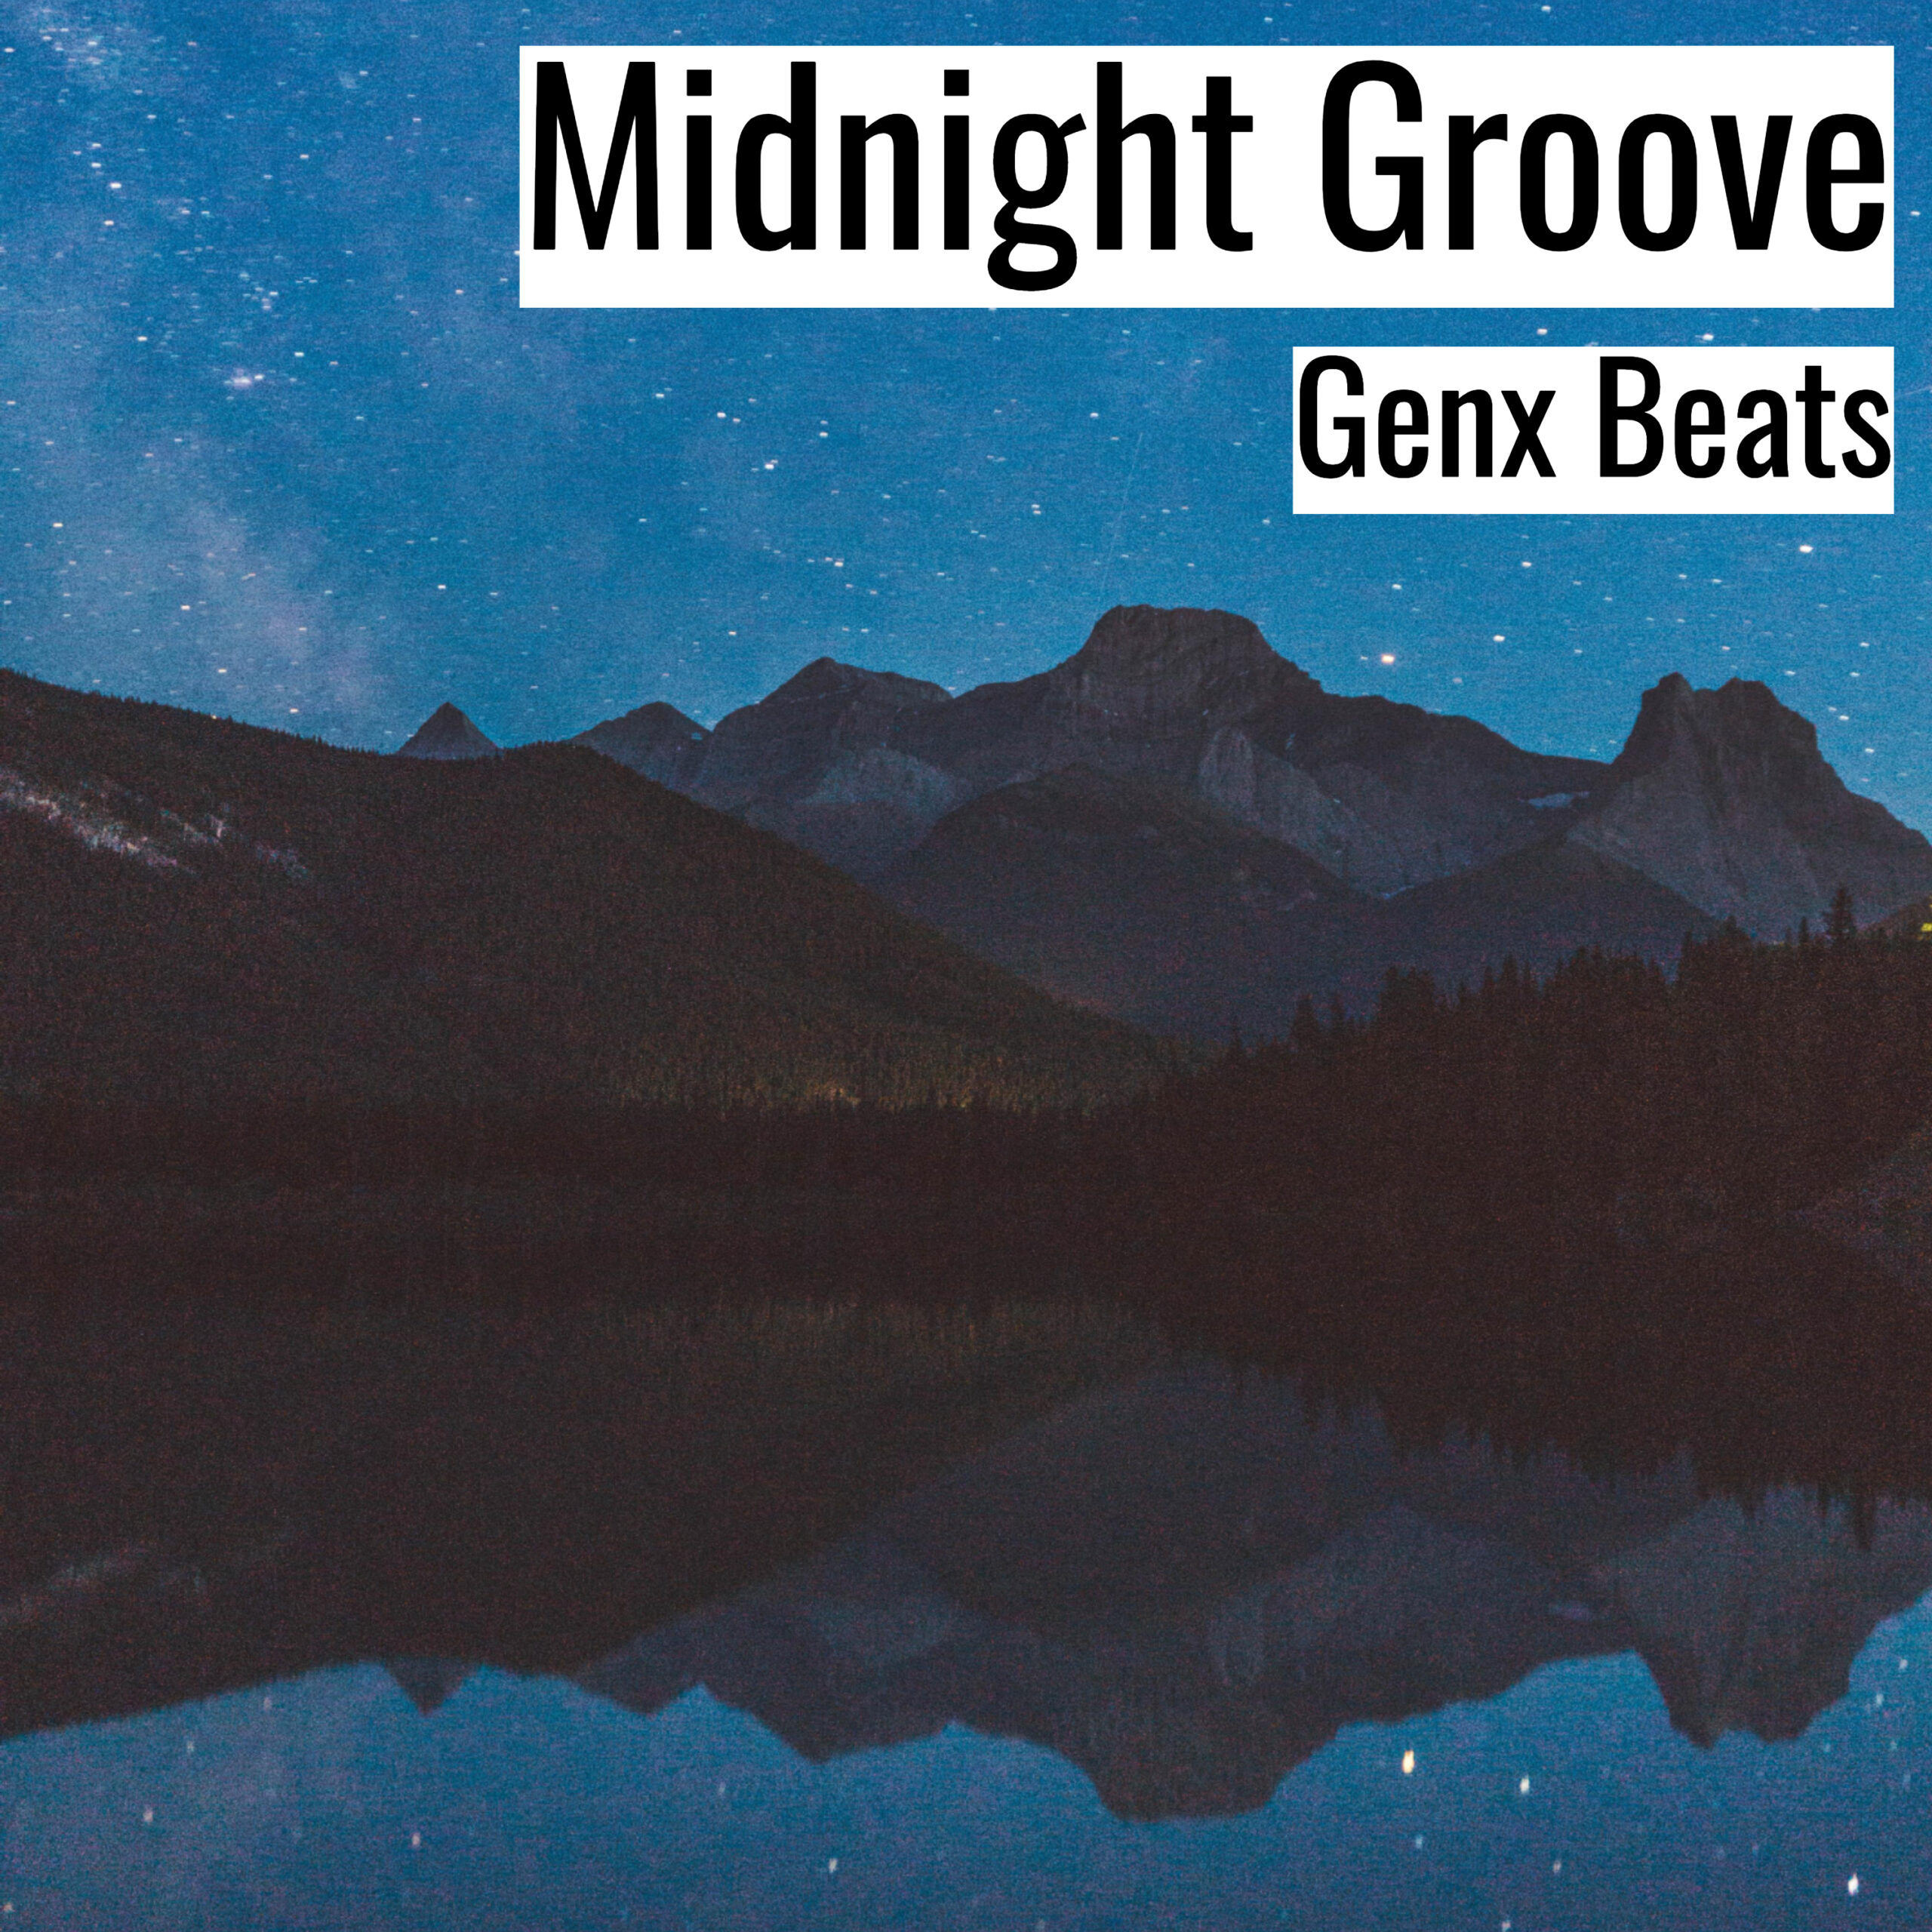 Midnight Groove scaled